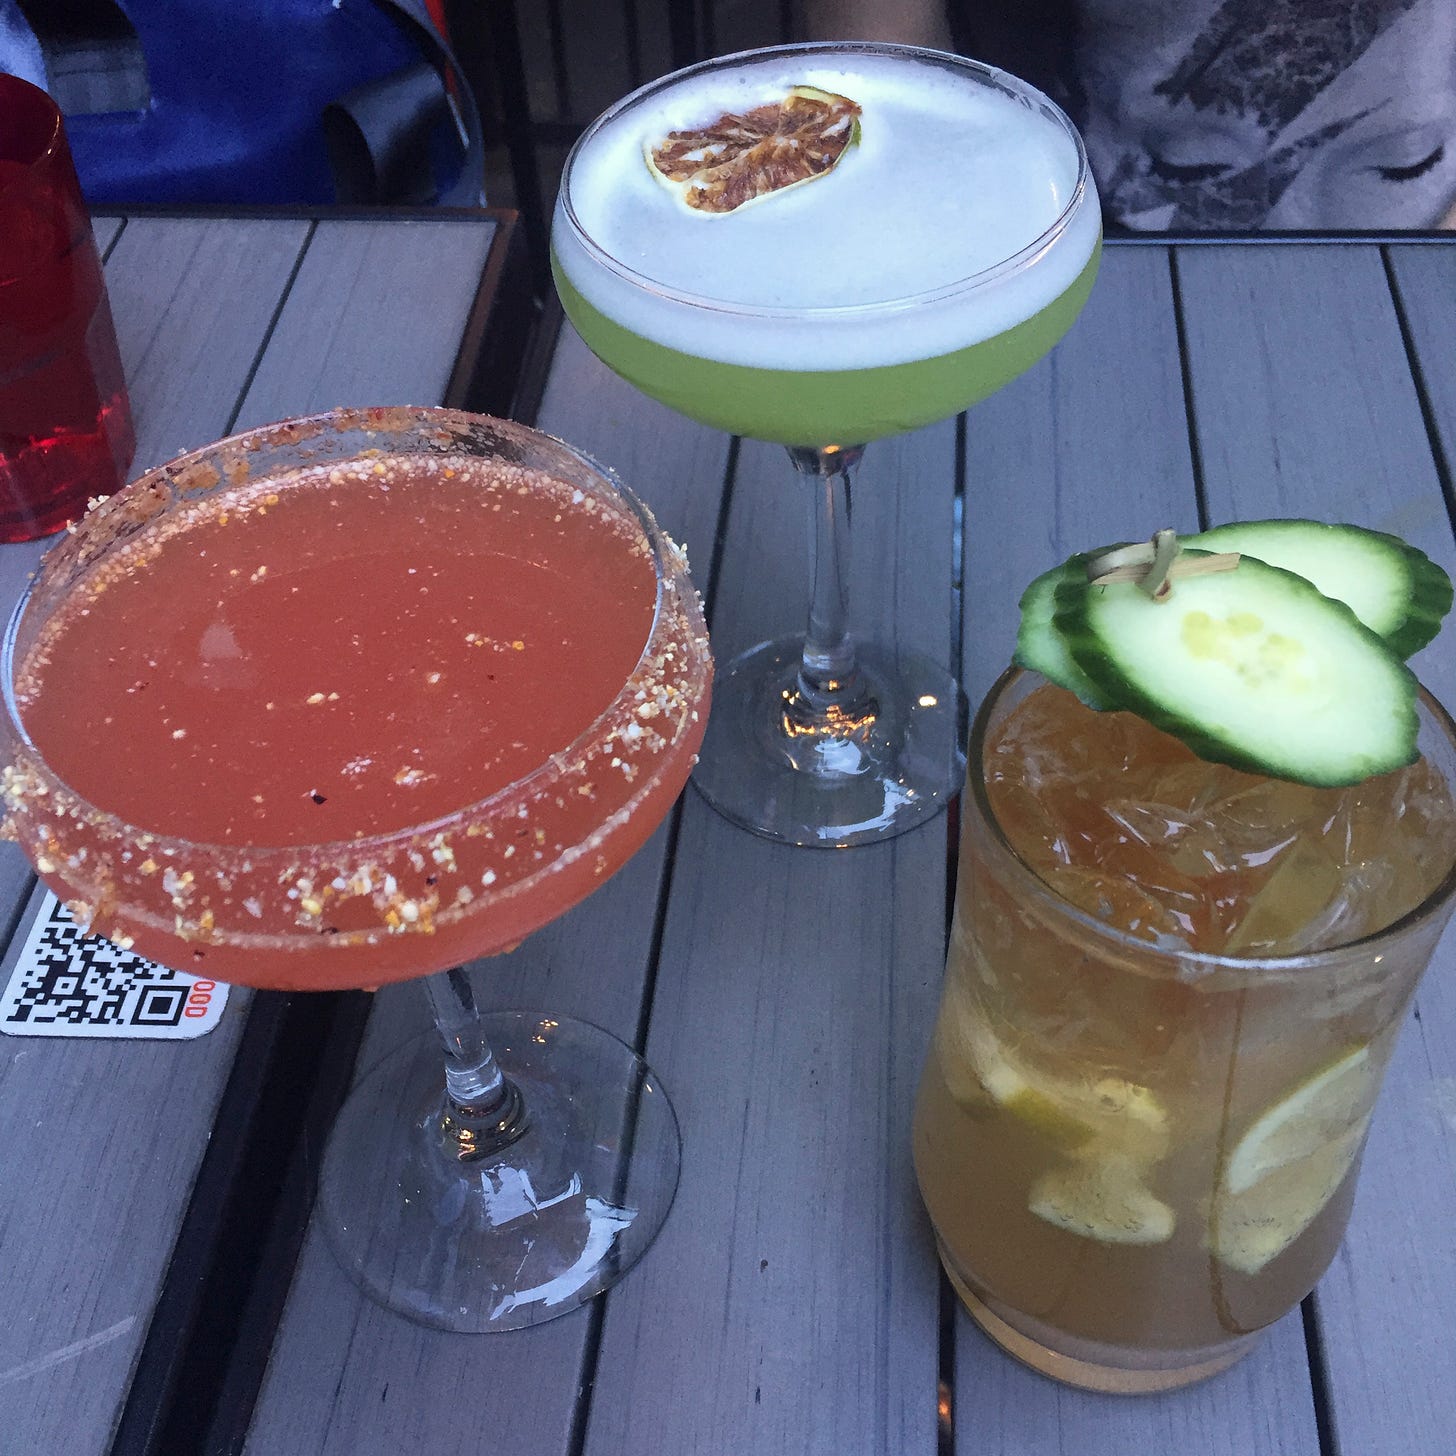 Three drinks on a patio table: one pink in a martini glass, one lime green in a coupé glass with a dehydrated lime floating in the foam on top, and one in a collins glass full of ice with cucumber slices speared on a toothpick.